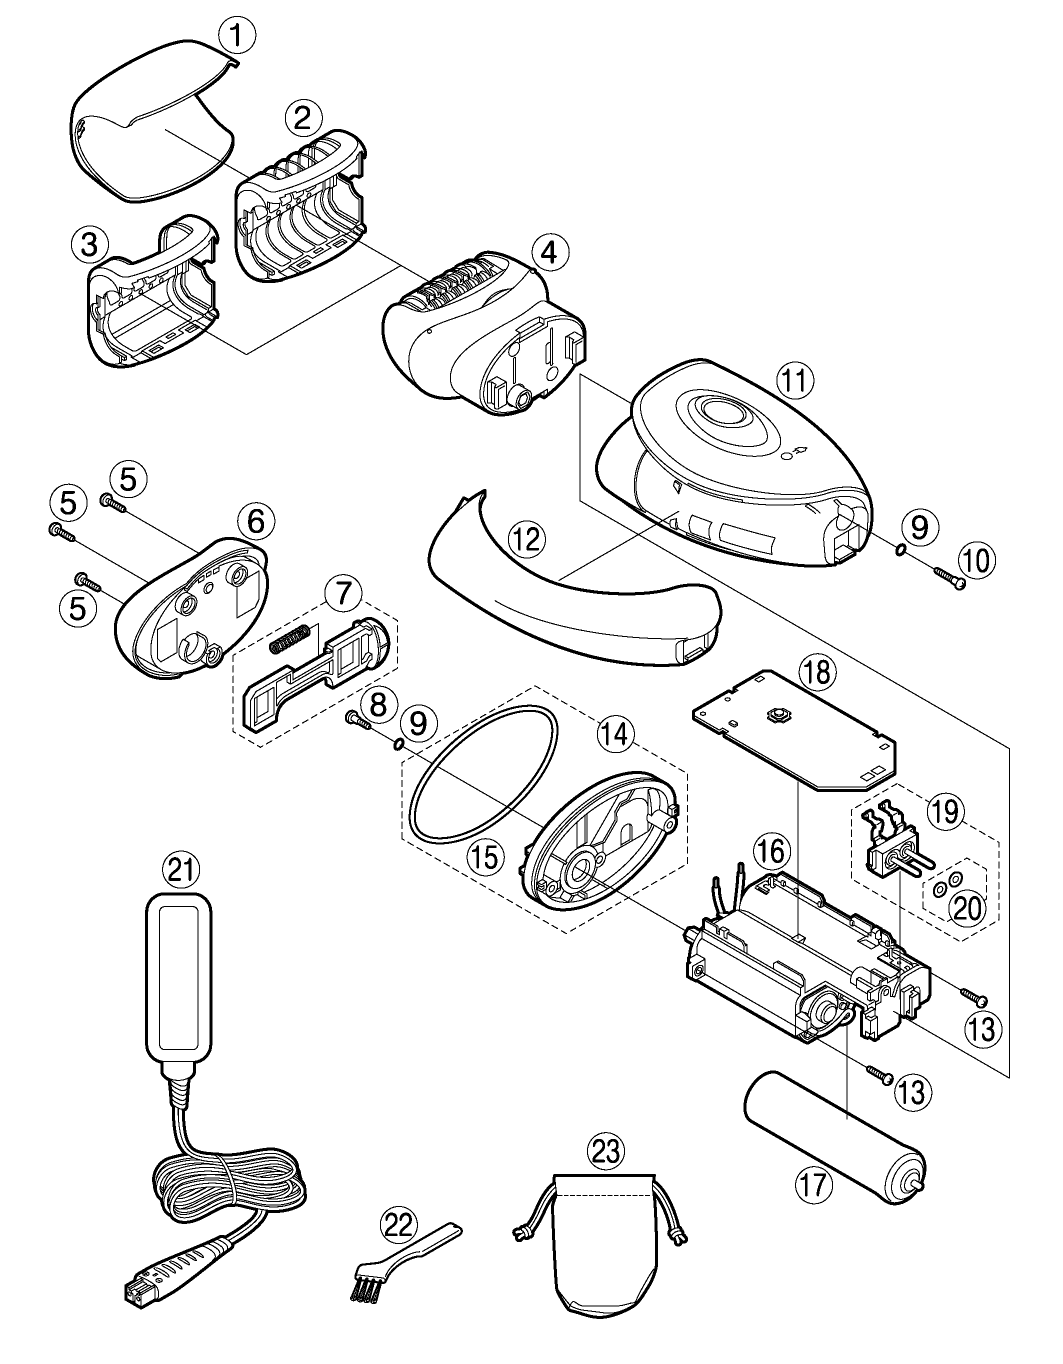 ES-WD10: Exploded View